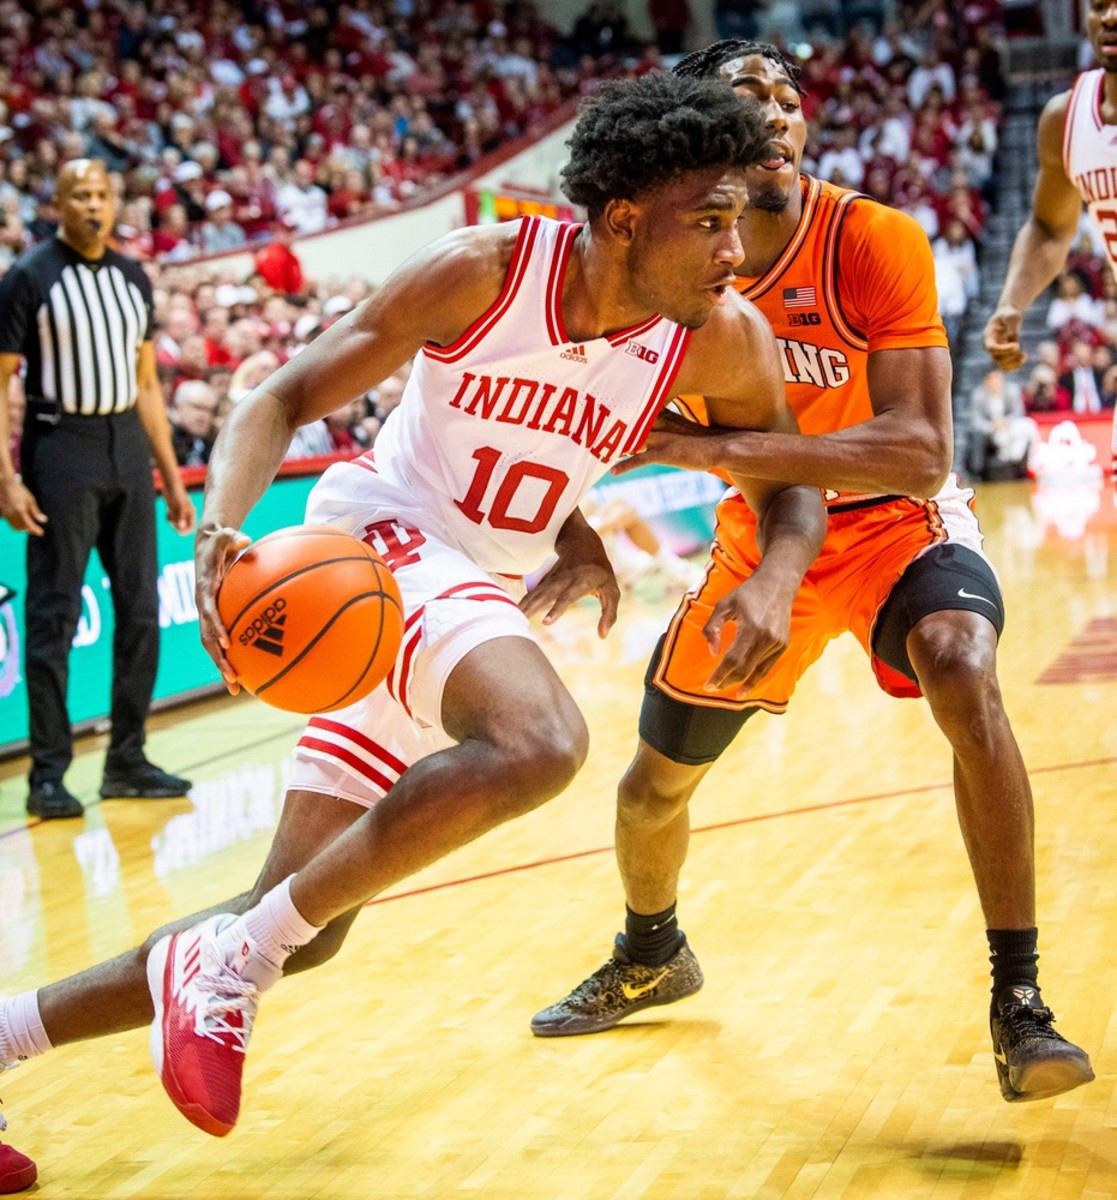 Indiana's Kaleb Banks (10) drives past Illinois' Sencire Harris (1) during the first half of the Indiana versus Illinois.